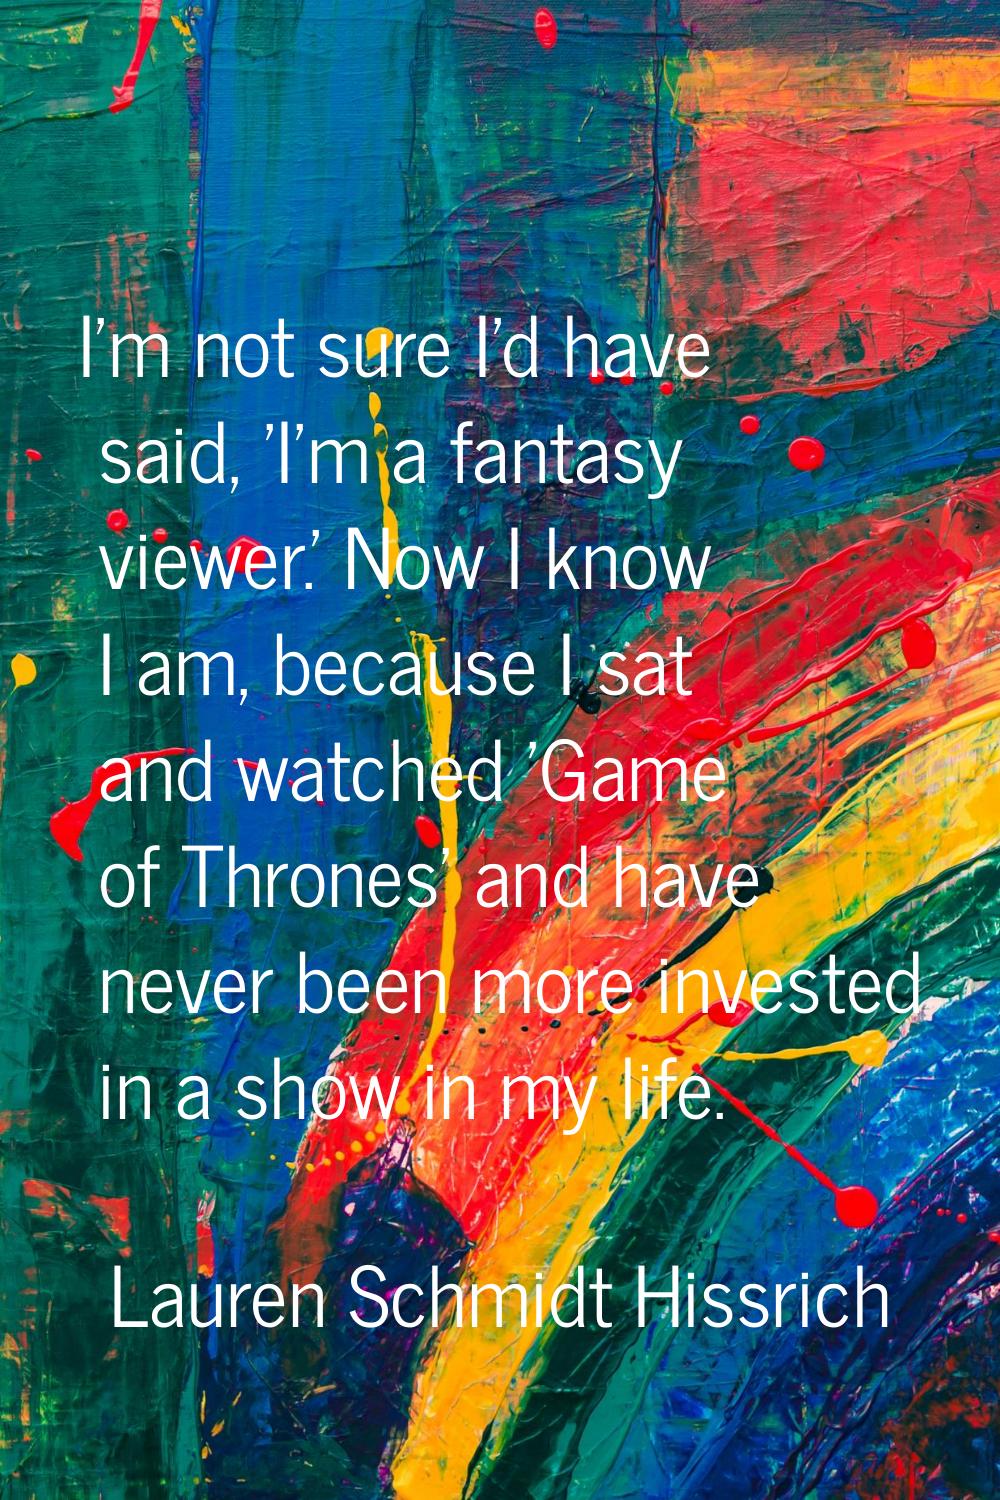 I'm not sure I'd have said, 'I'm a fantasy viewer.' Now I know I am, because I sat and watched 'Gam